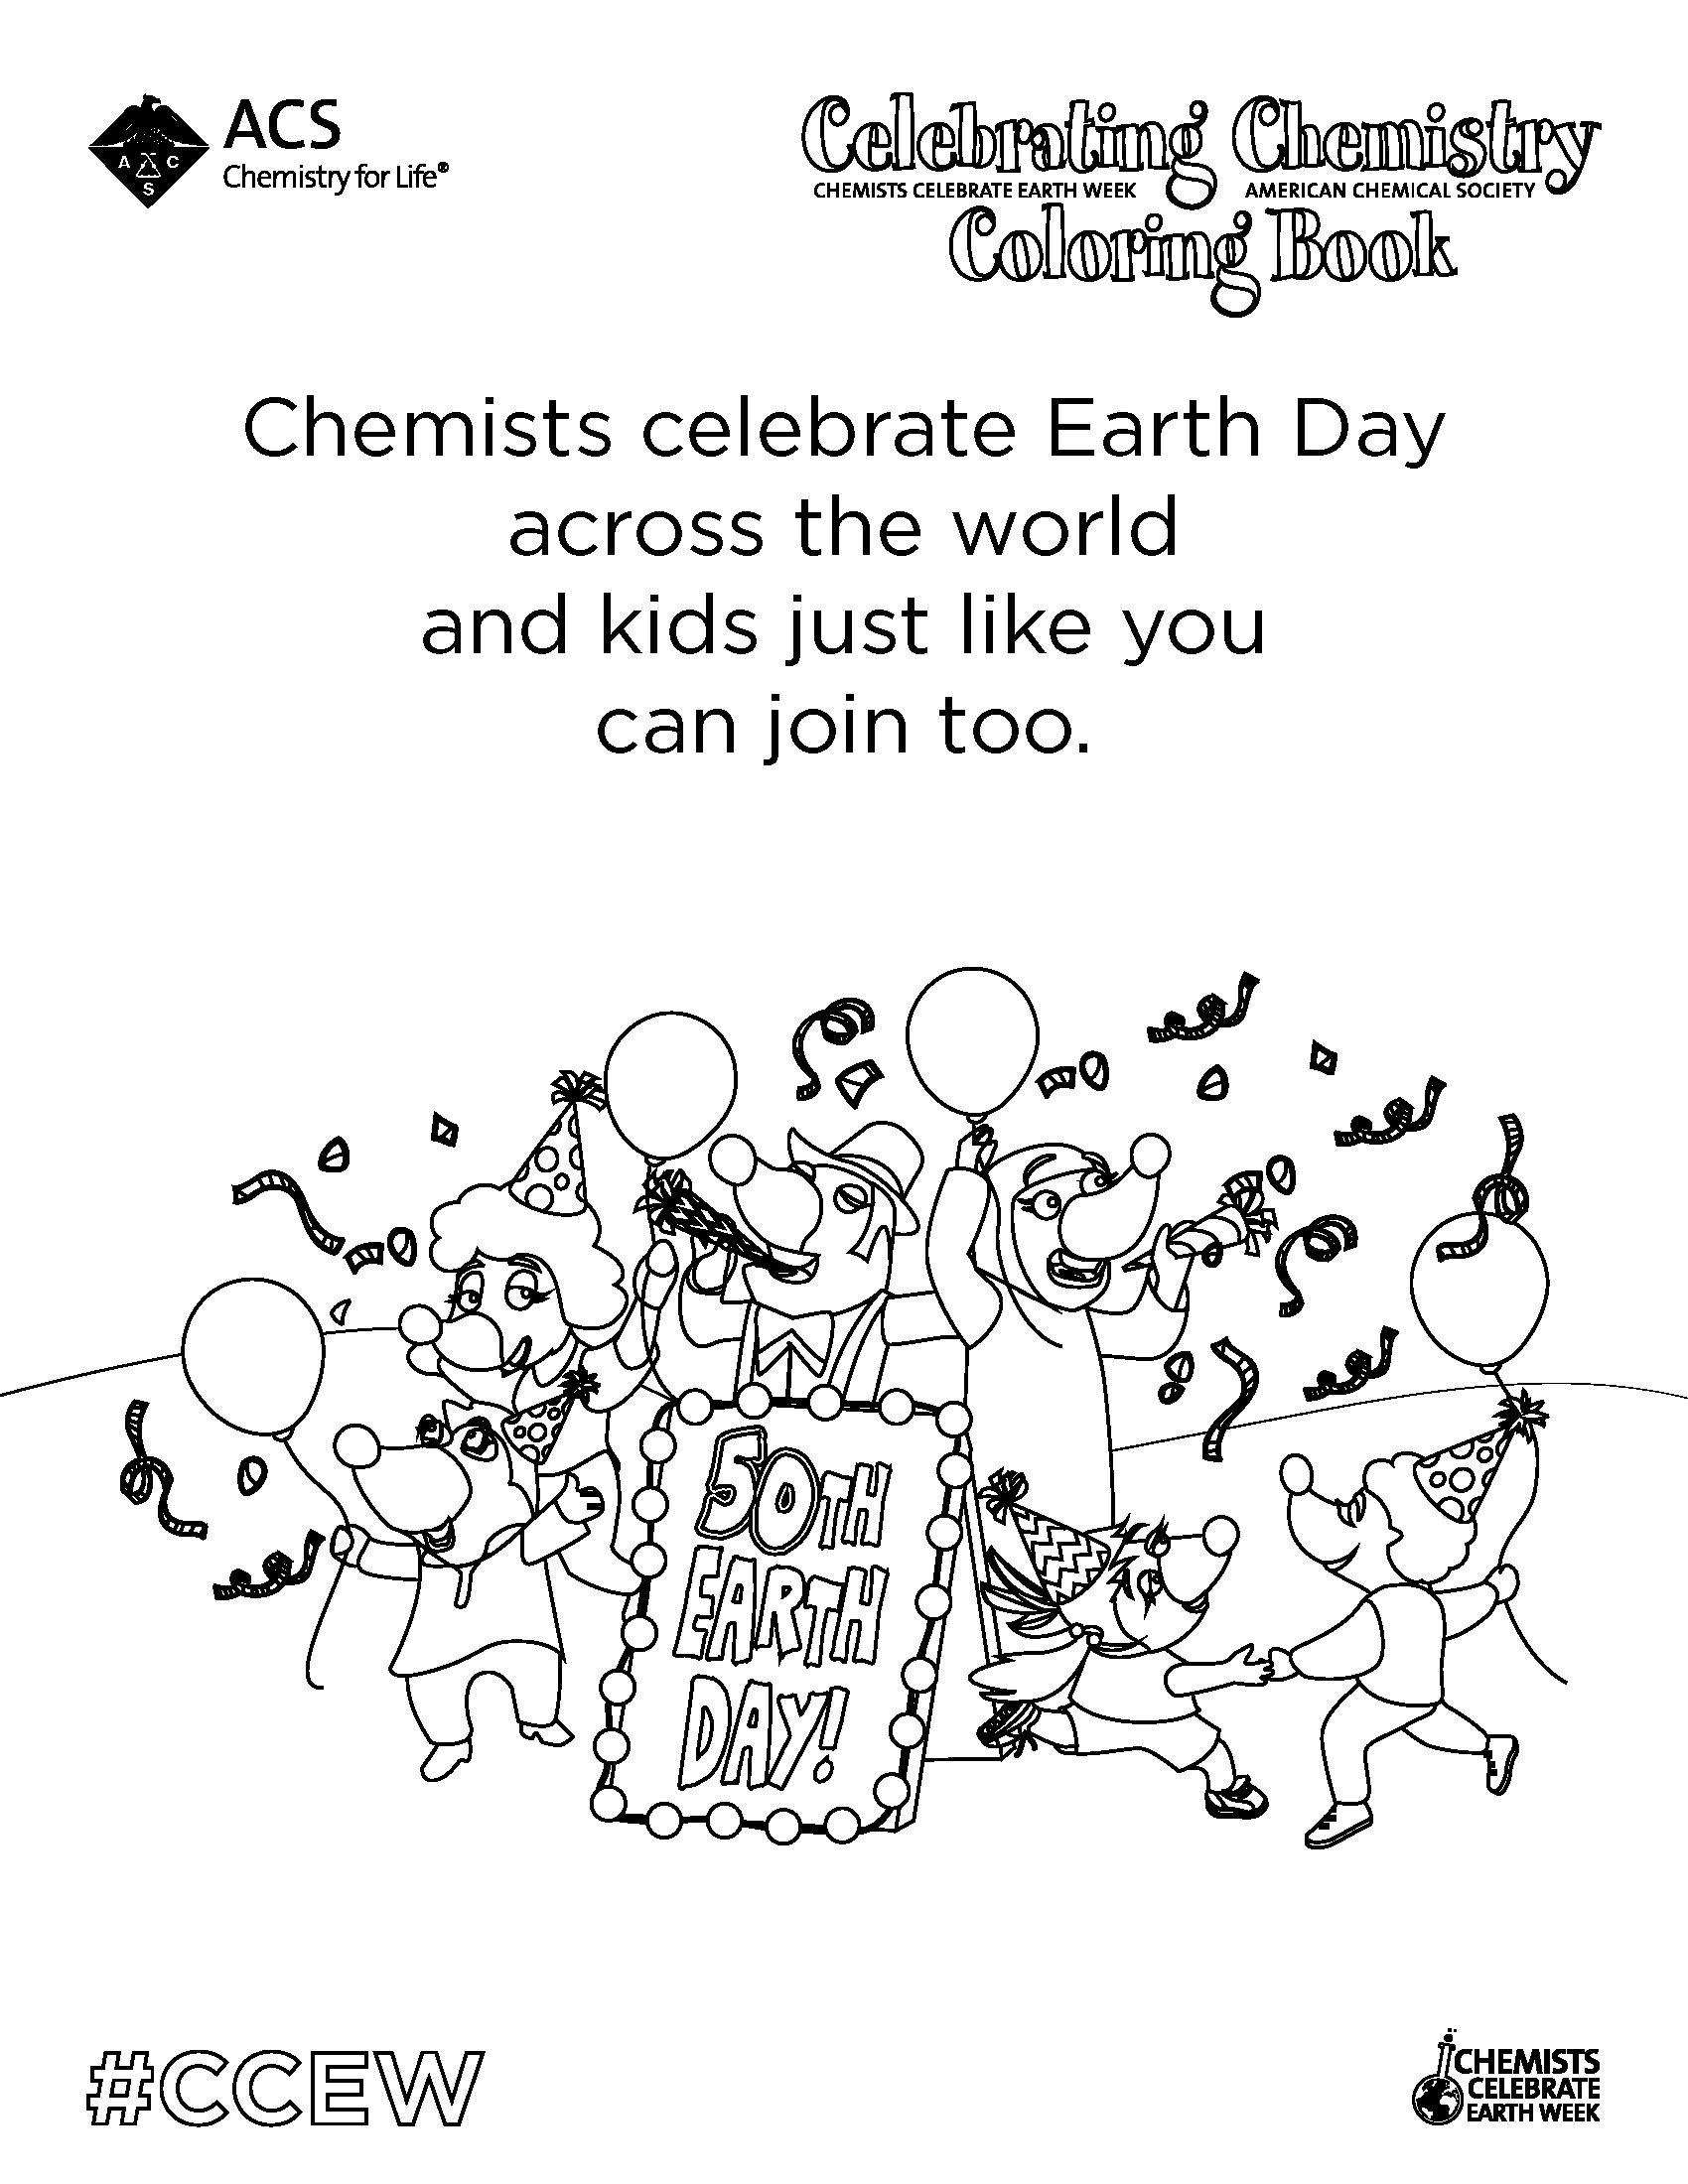 Download Ccew 2020 Celebrating Chemistry Coloring Book American Chemical Society